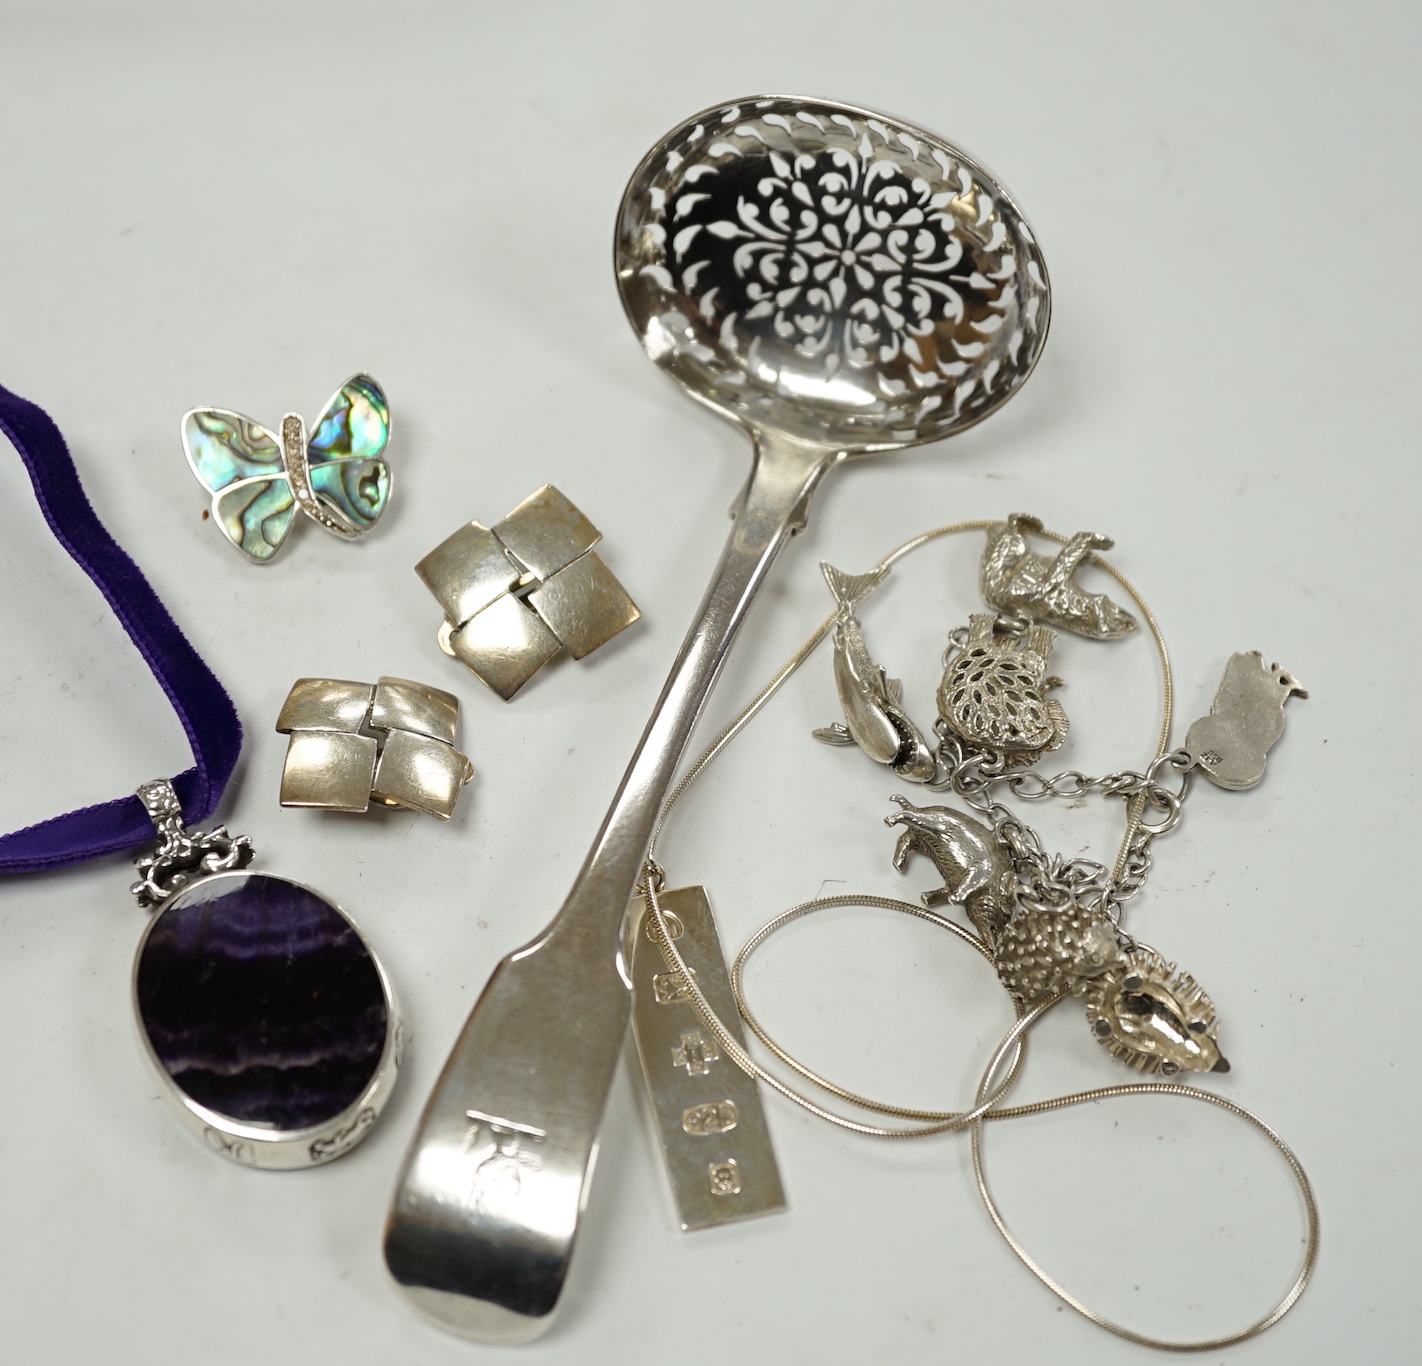 A modern silver mounted blue john pendant, by David Scott Walker, 54mm, together with other jewellery including silver ingot pendant, charm bracelet etc. and a George IV silver sifter spoon, William Eaton, London, 1829.